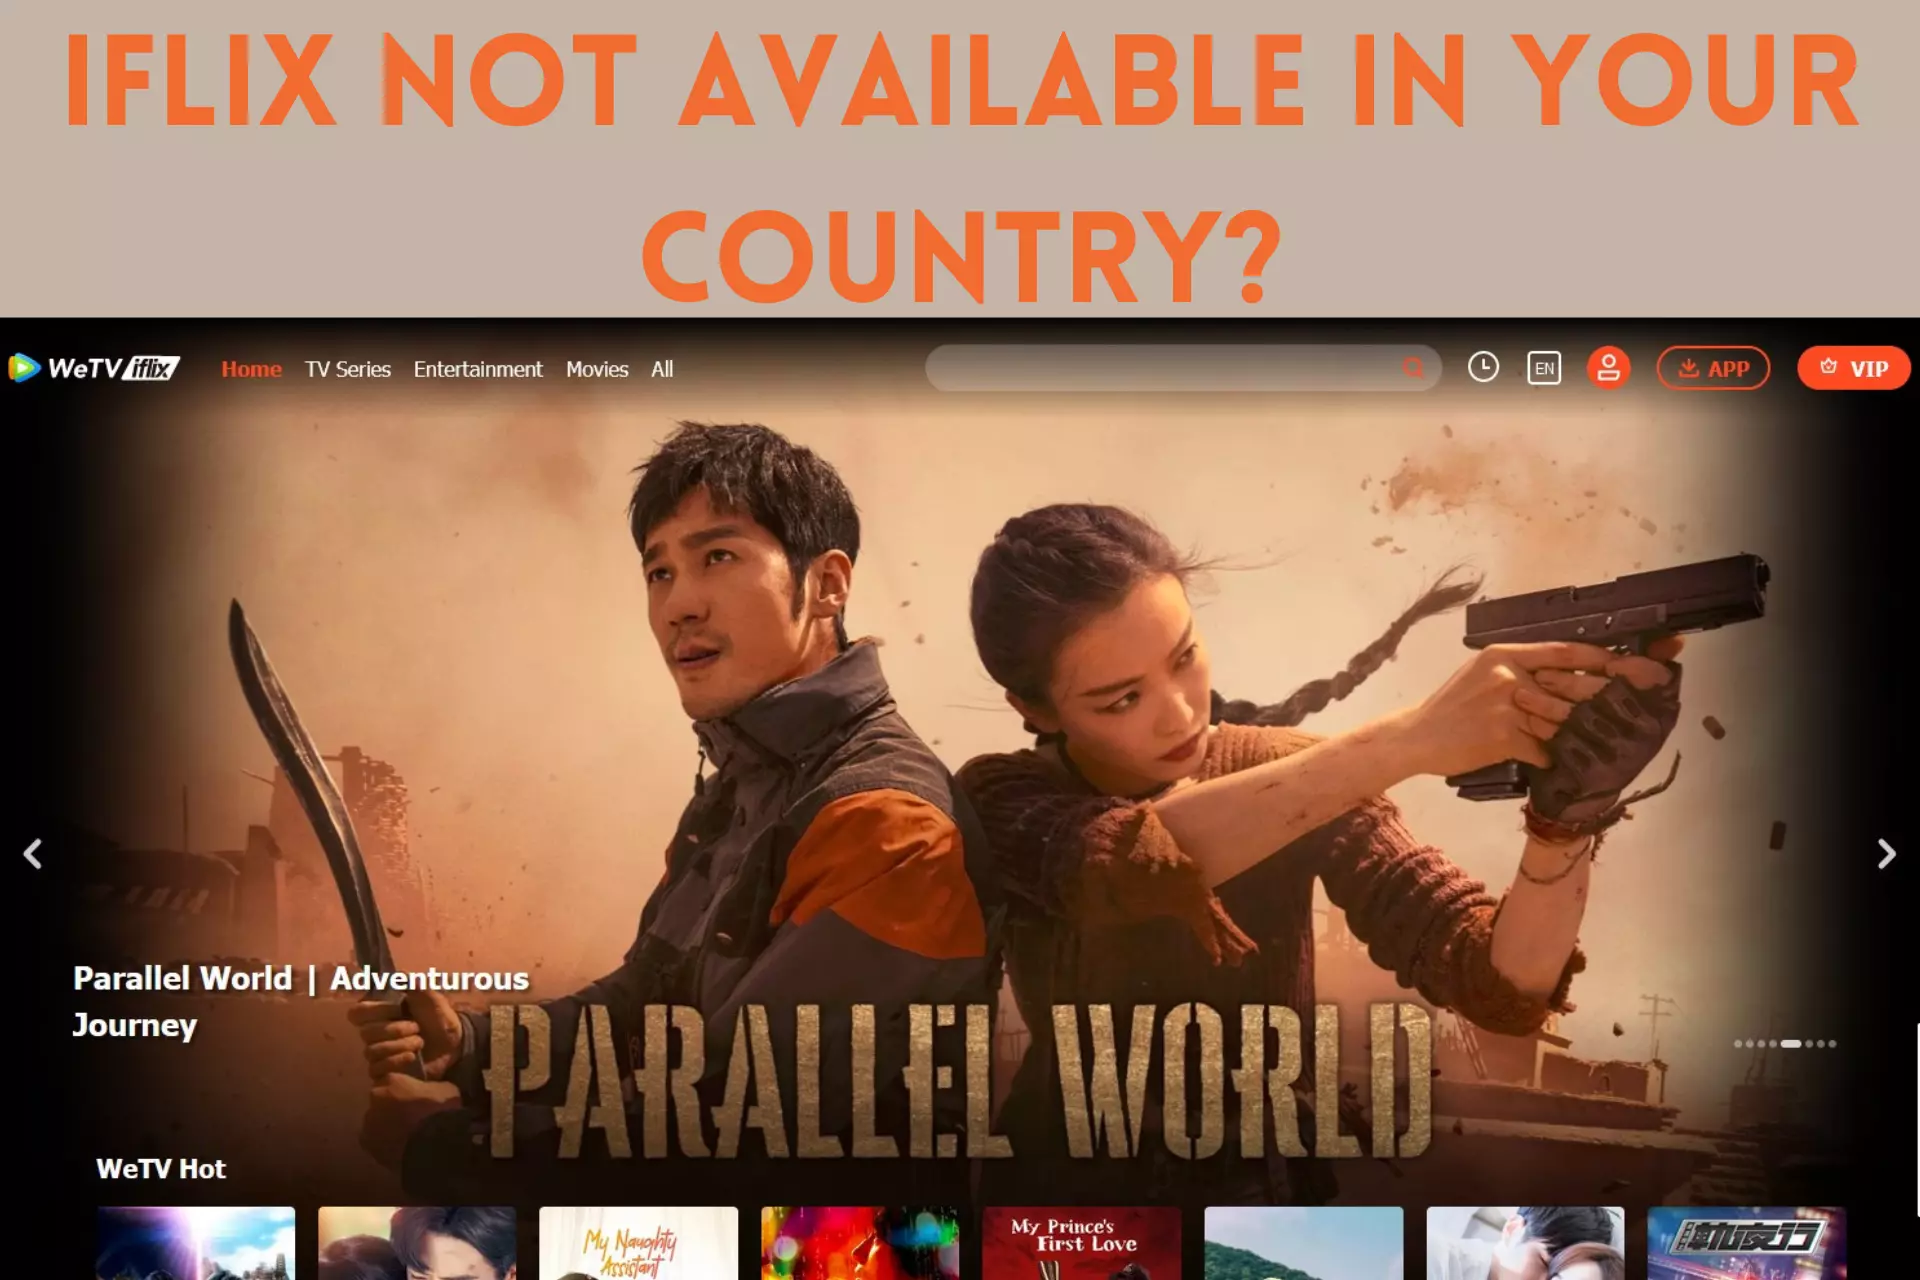 IFLIX NOT AVAILABLE IN YOUR COUNTRY